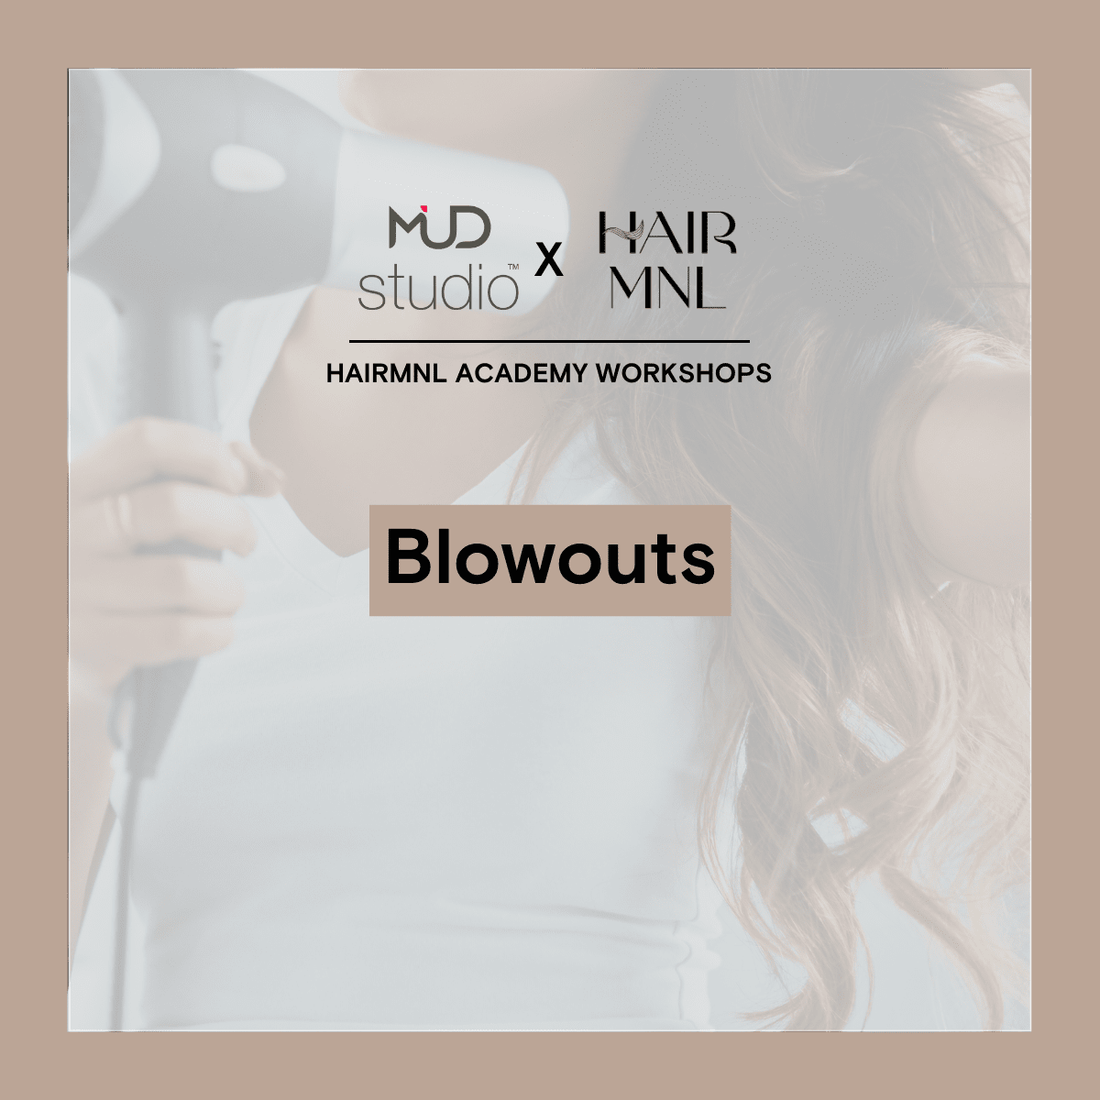 HairMNL Academy Workshops by MUD Studio Personal Blowouts